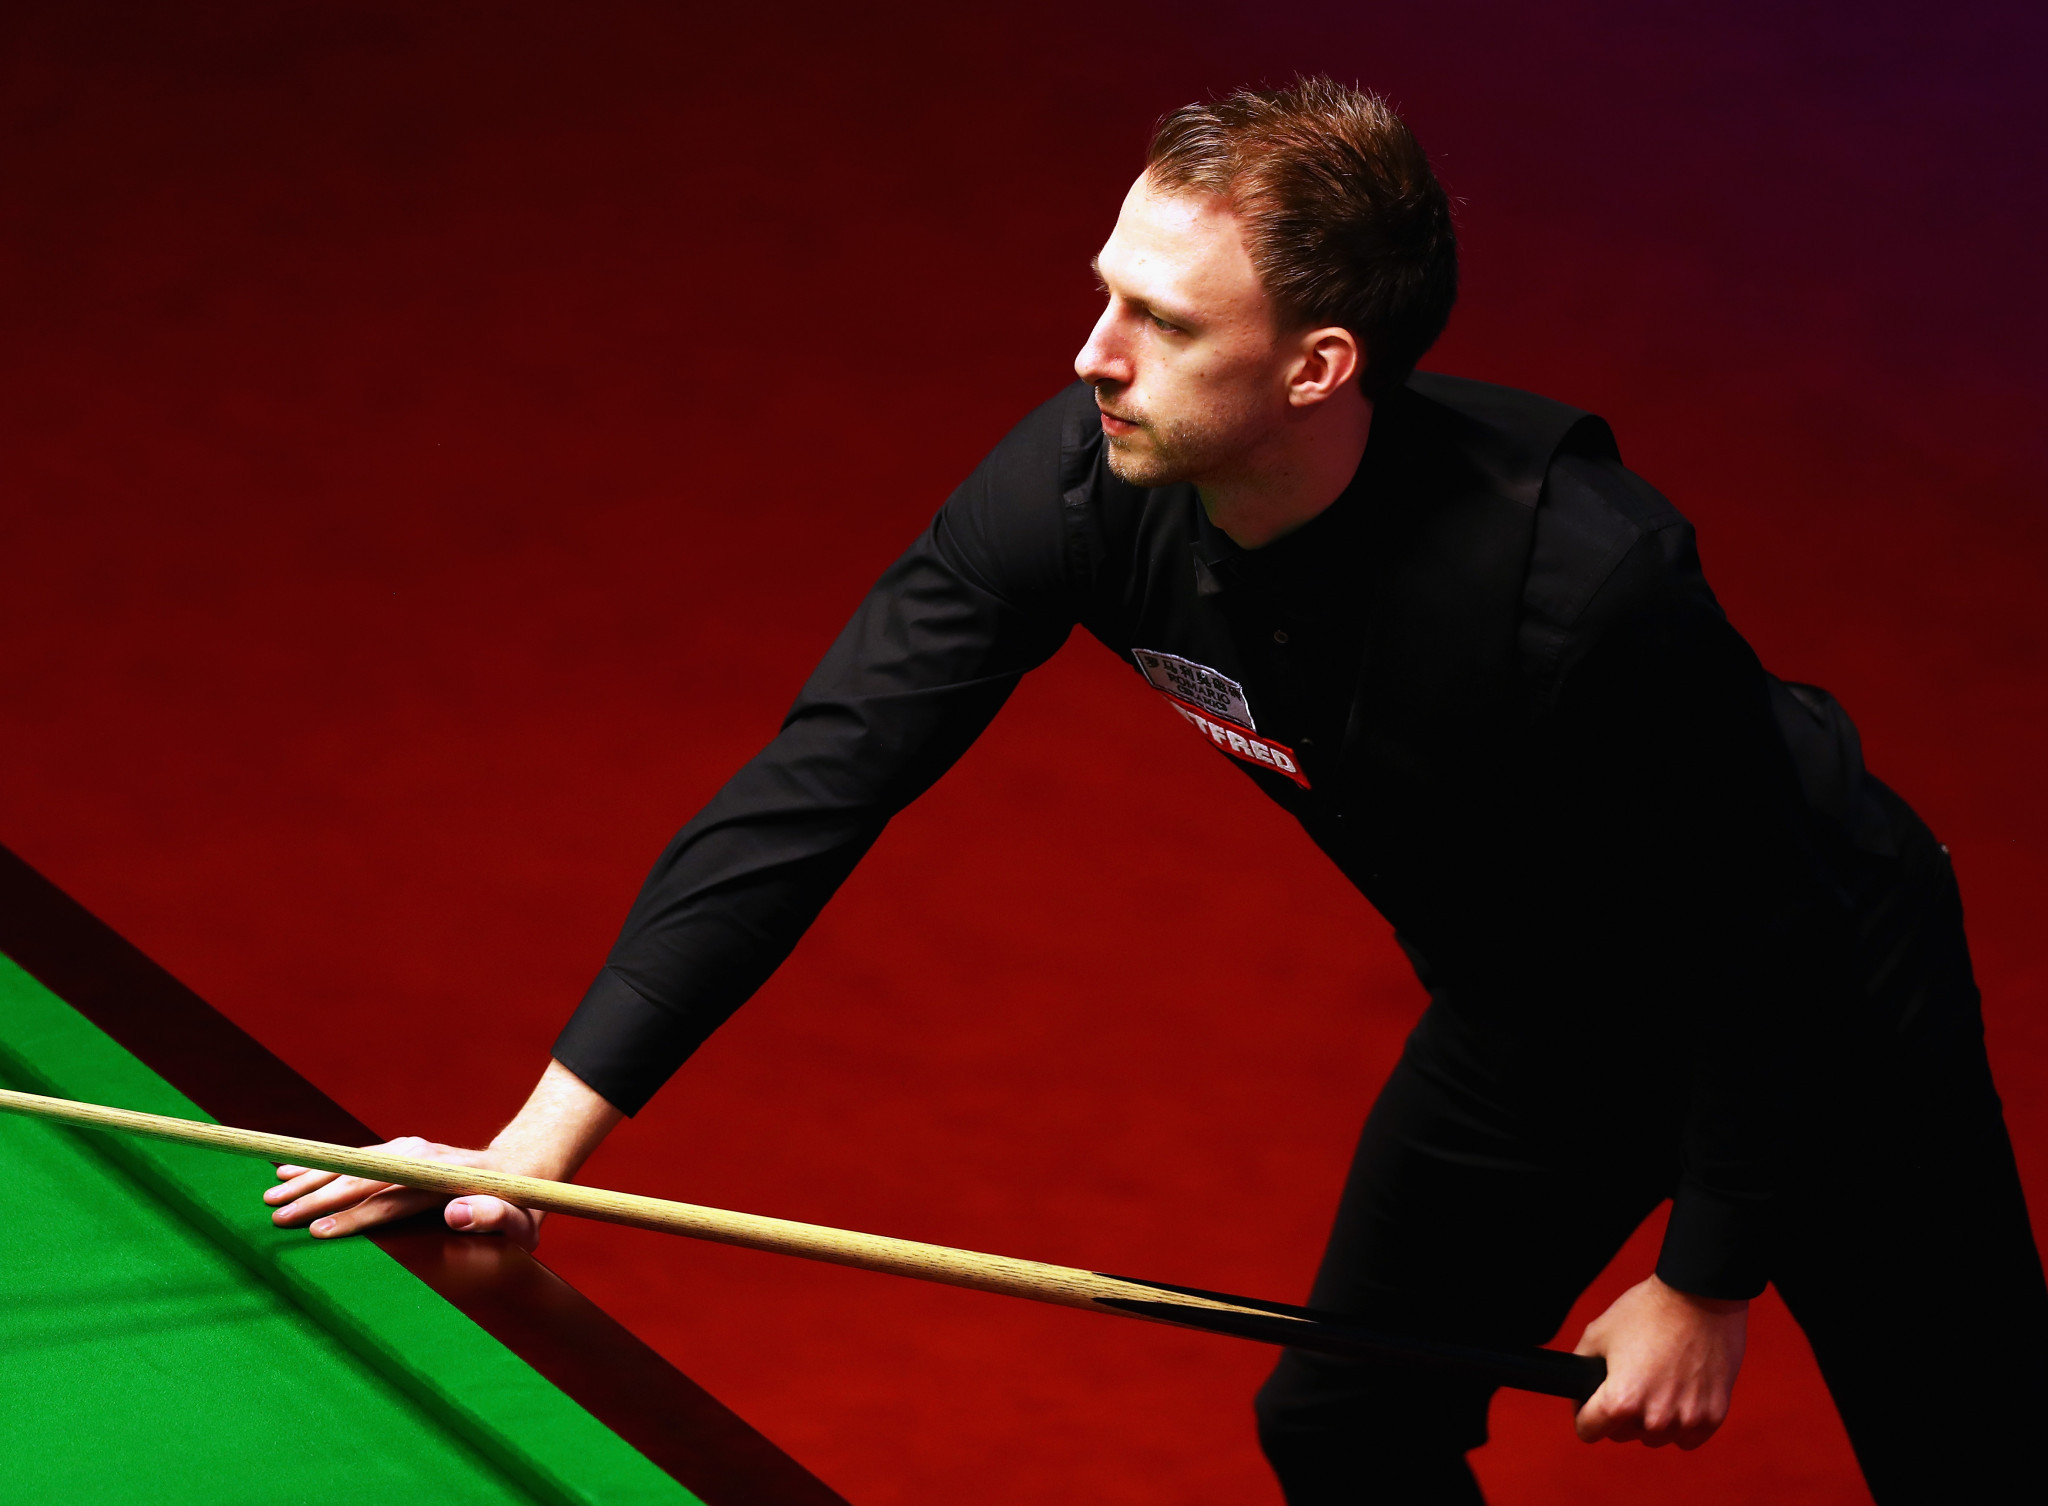 England's Judd Trump survived a first-round scare against compatriot Chris Wakelin ©Getty Images